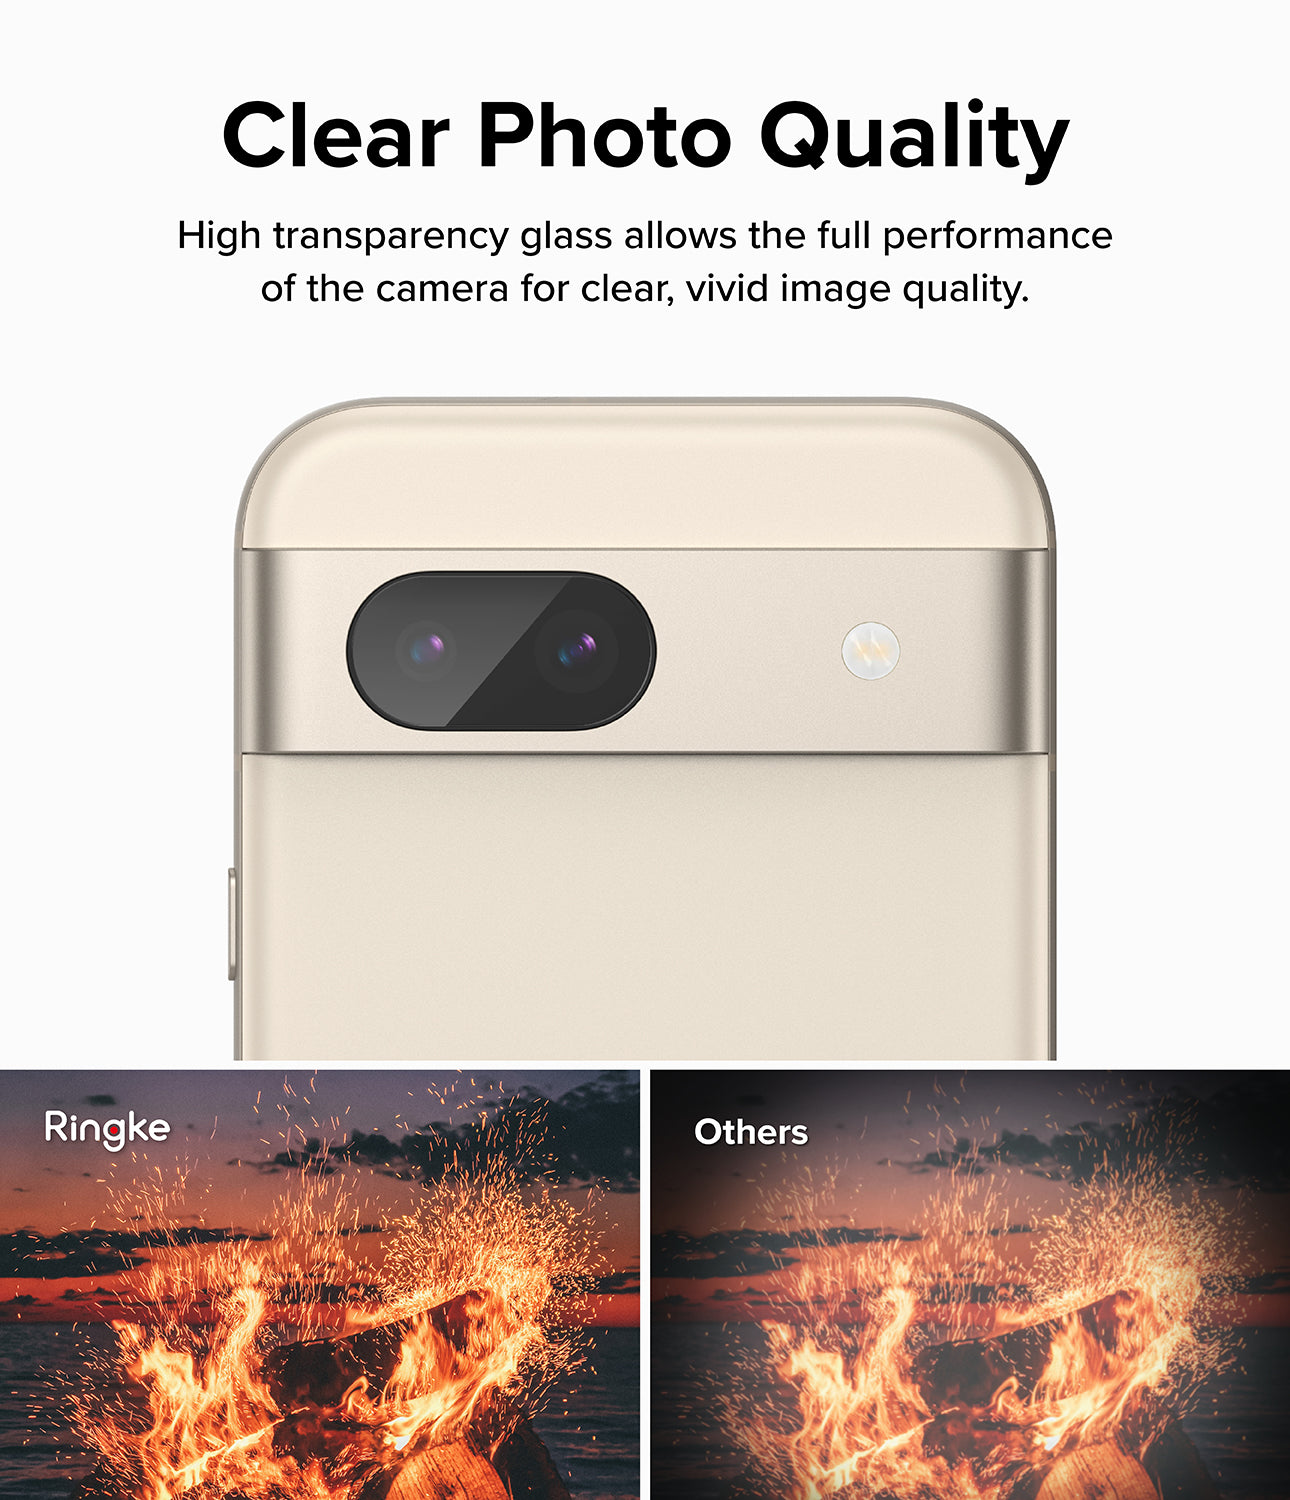 Google PIxel 8a Camera Lens Protector | Glass (3 Pack)- clear Photo Quality. High transparency glass allows the full performance of the camera for clear, vivid image quality.